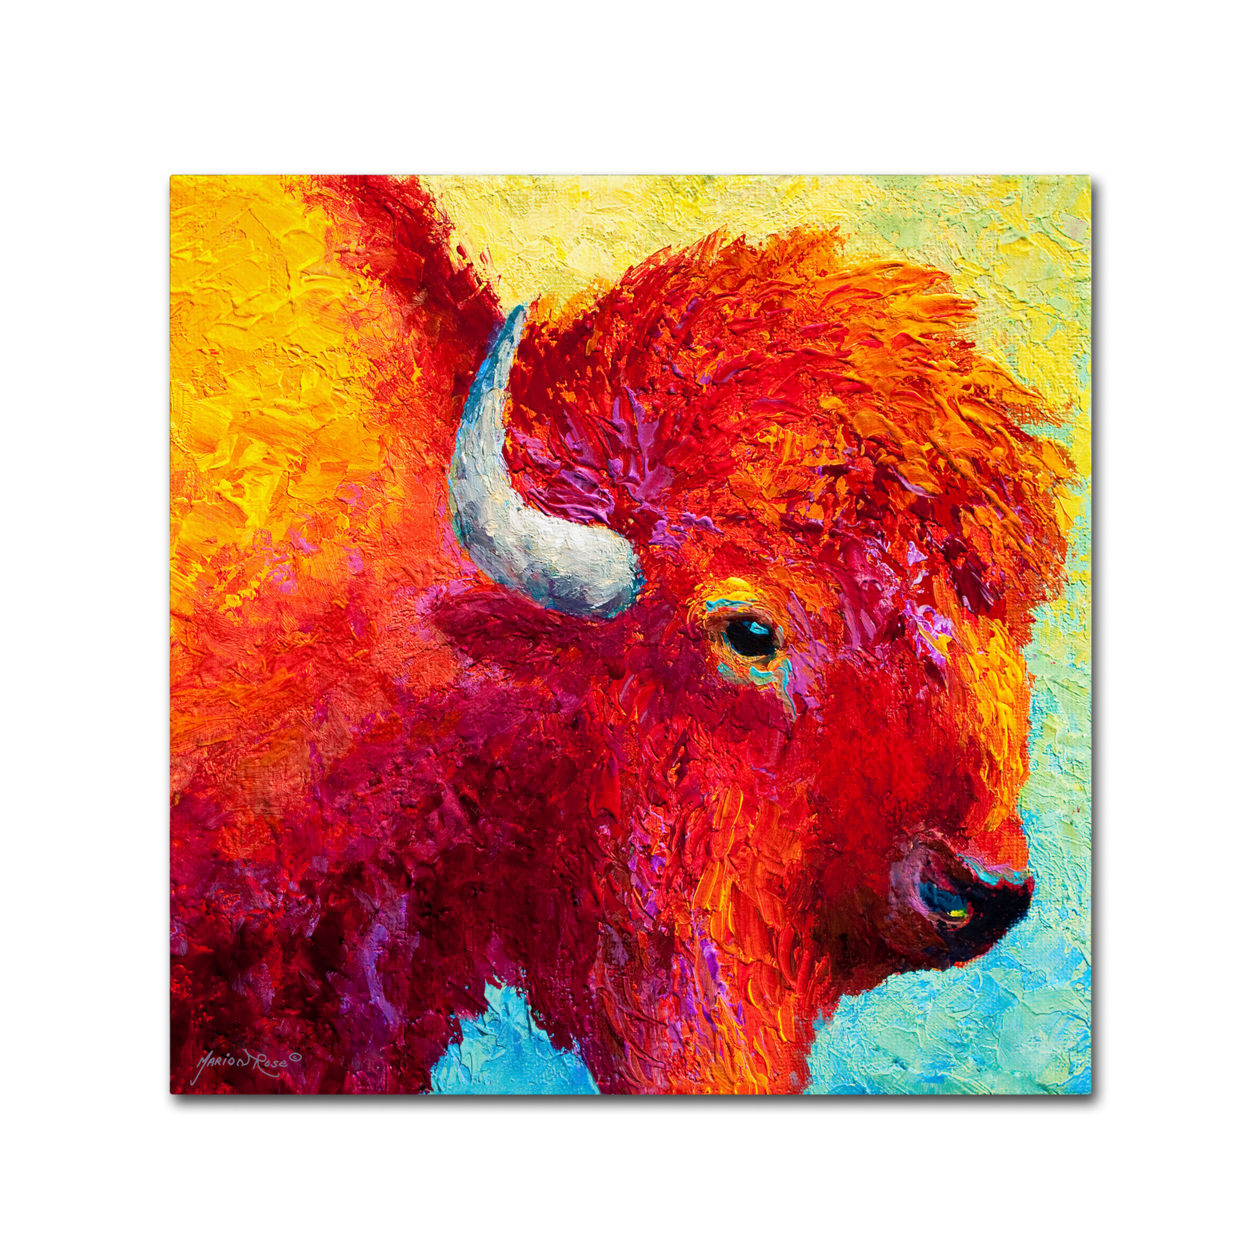 Marion Rose 'Bison Head IV' Ready To Hang Canvas Art 35 X 35 Inches Made In USA